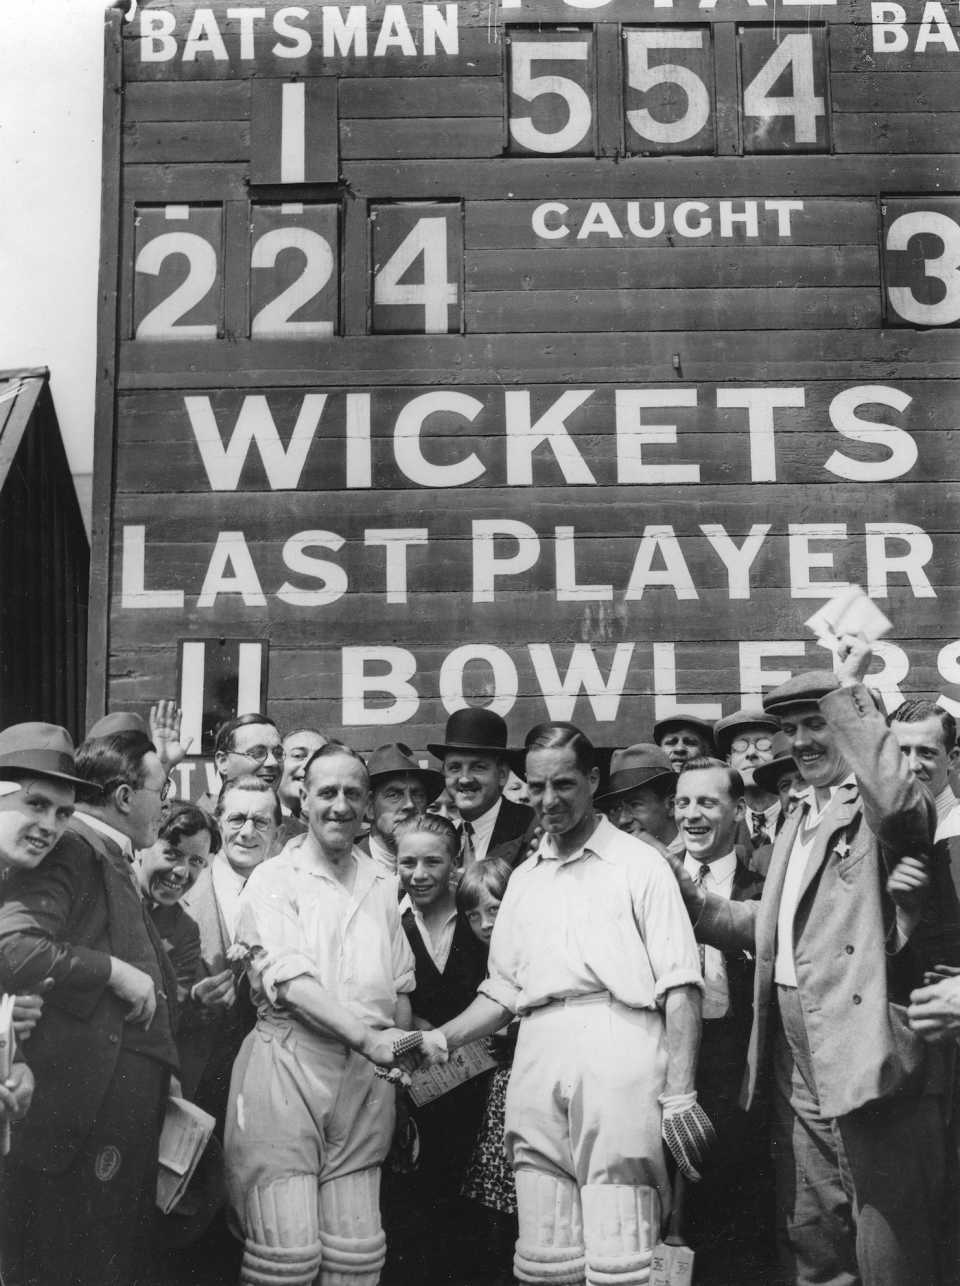 Crowds surround the scorebox just before Percy Holmes and Herbert Sutcliffe's 555 first-wicket stand